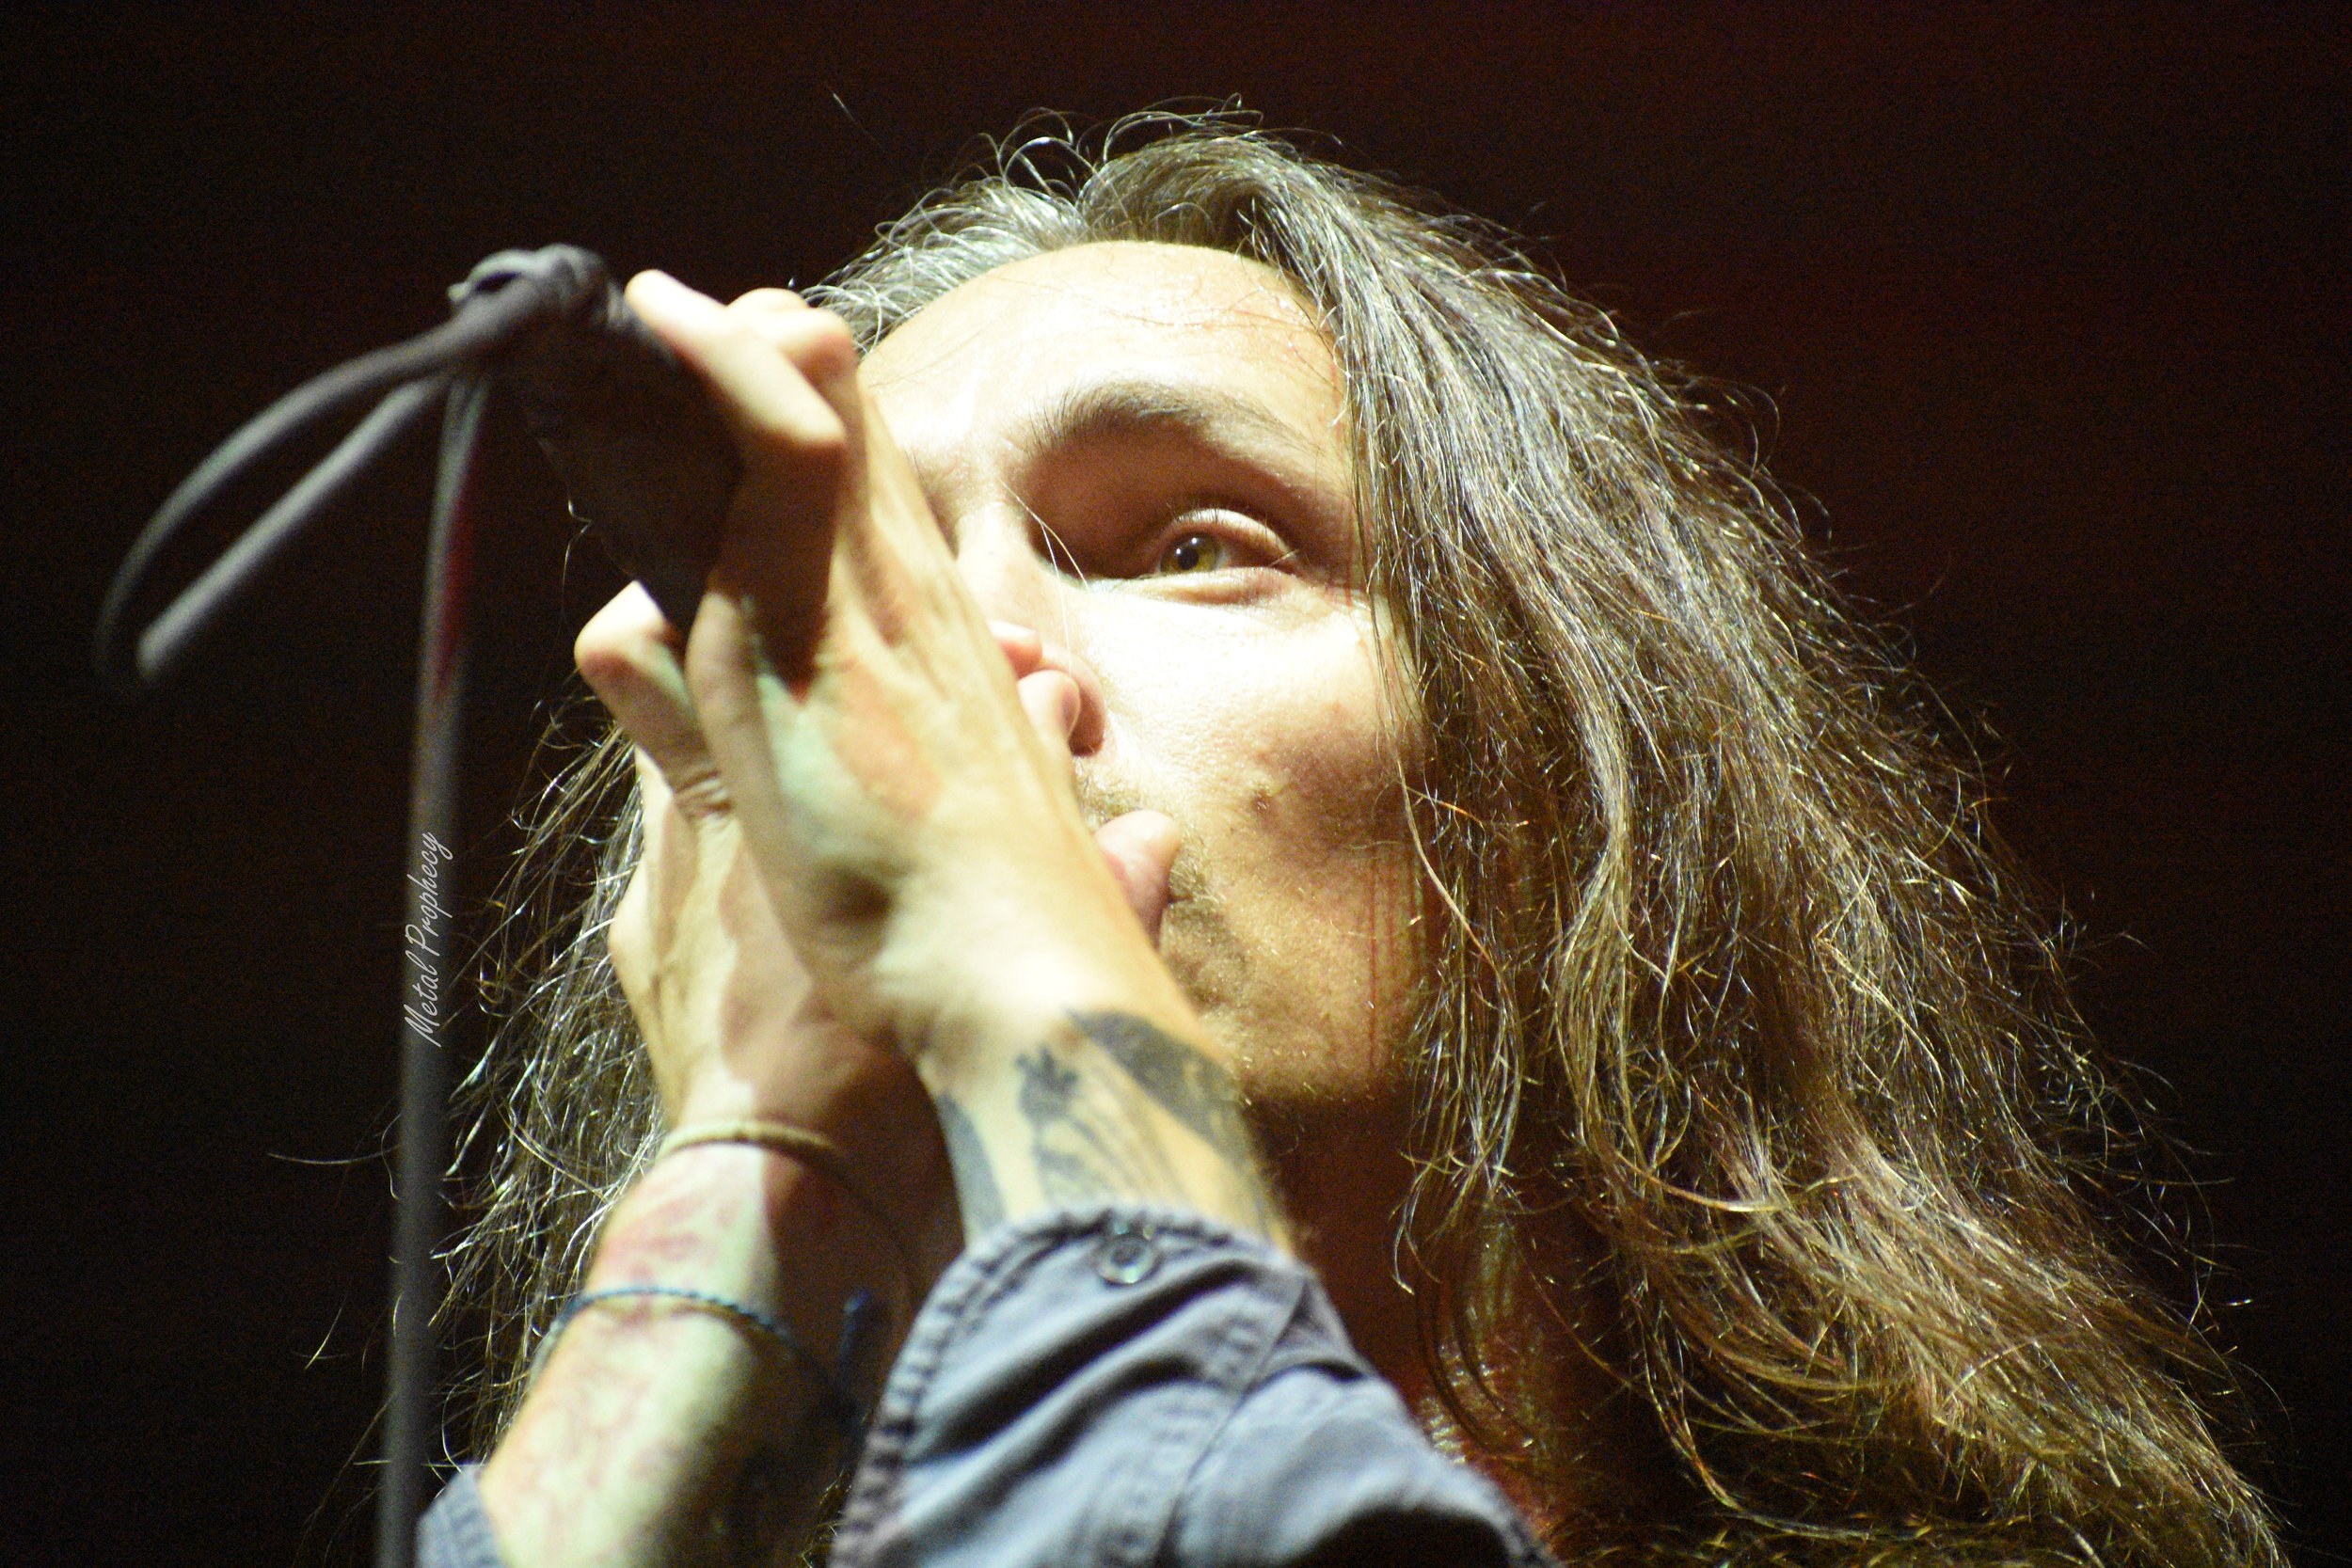 Incubus at Welcome to Rockville 2019